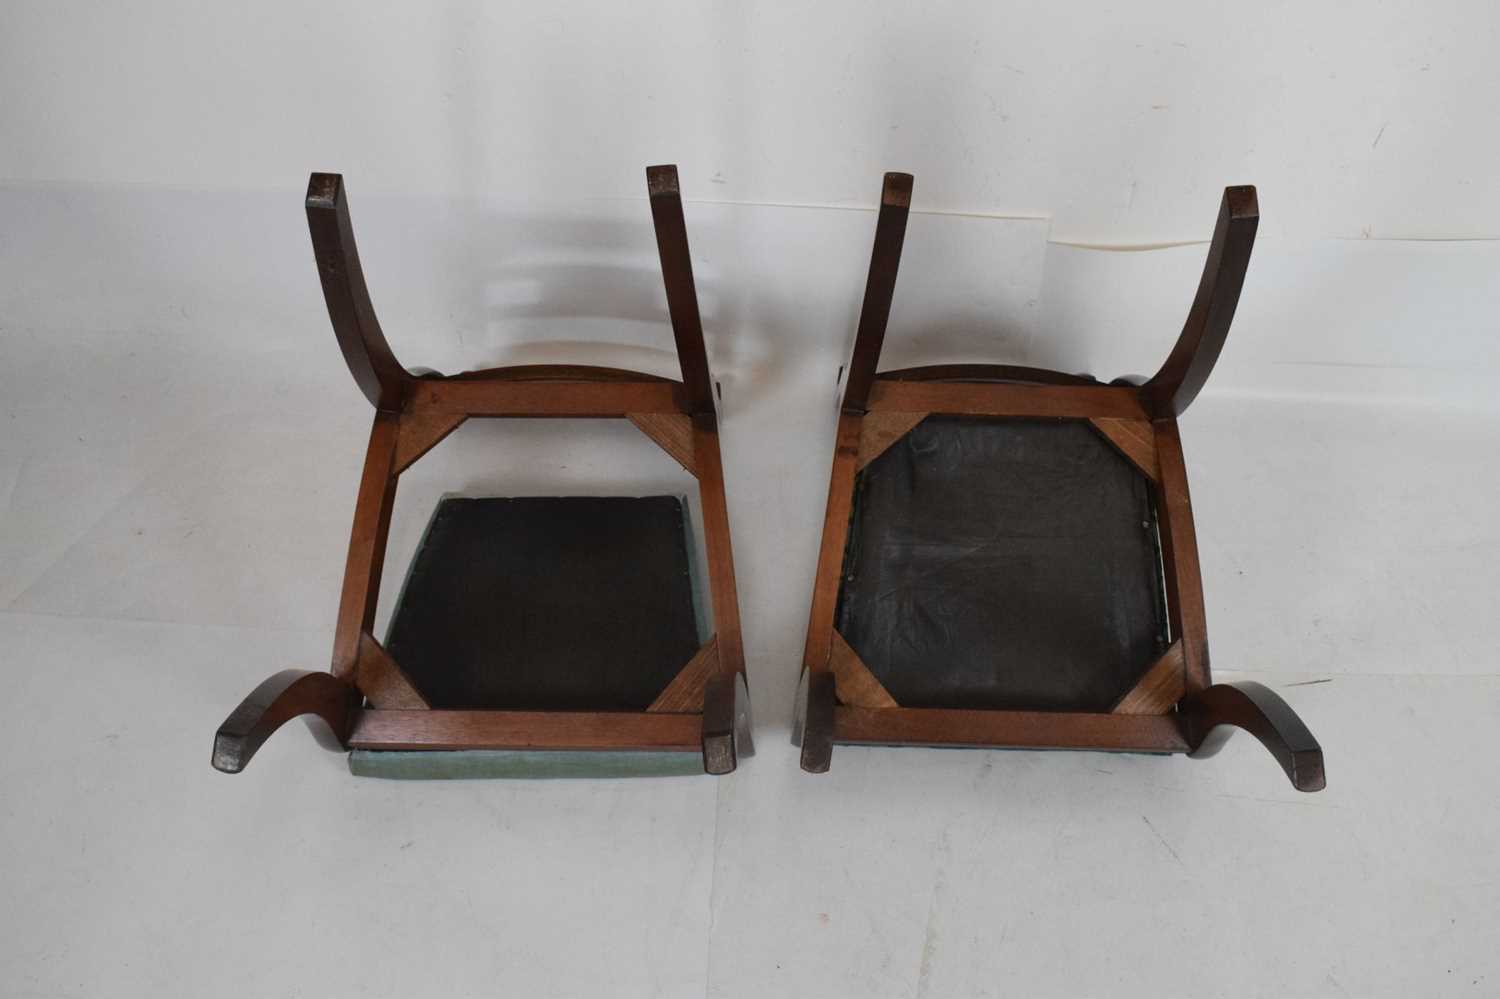 Set of four mahogany and brass inlaid chairs - Image 12 of 12